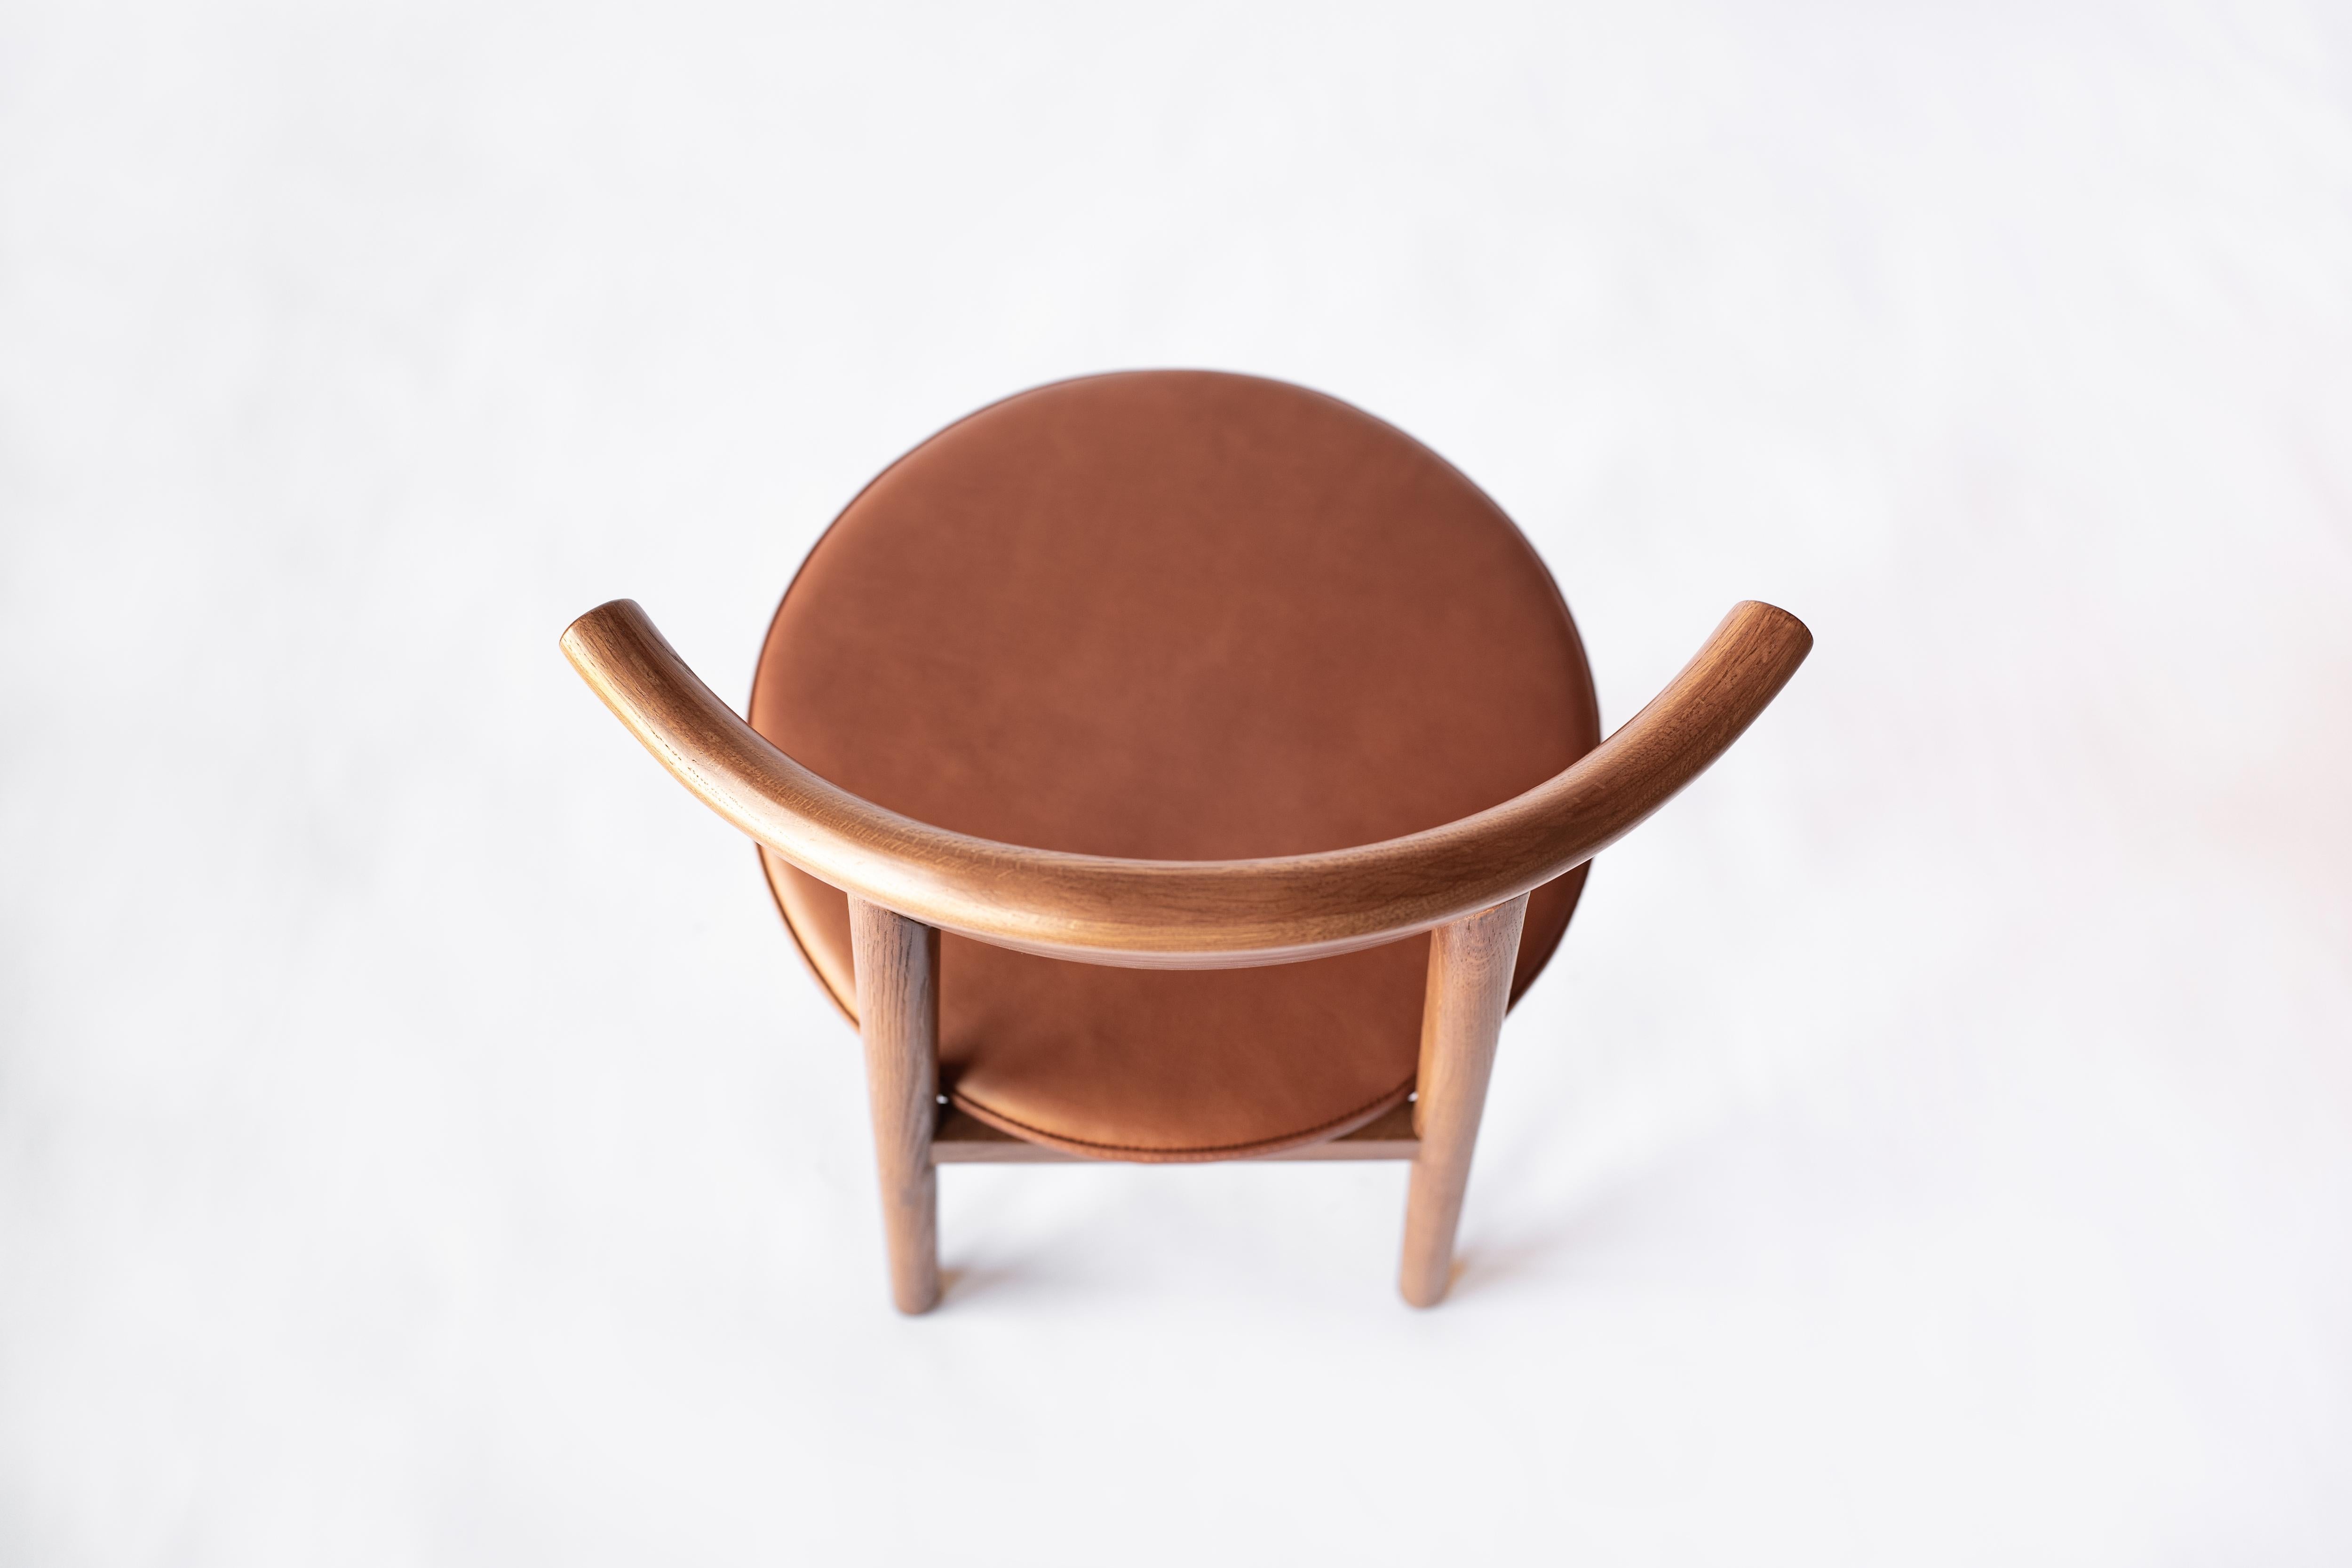 Sun at six is a contemporary furniture design studio working with traditional Chinese joinery masters to handcraft our pieces using traditional joinery. The Ember chair is a versatile seat made using traditional joinery techniques. The wide, curved